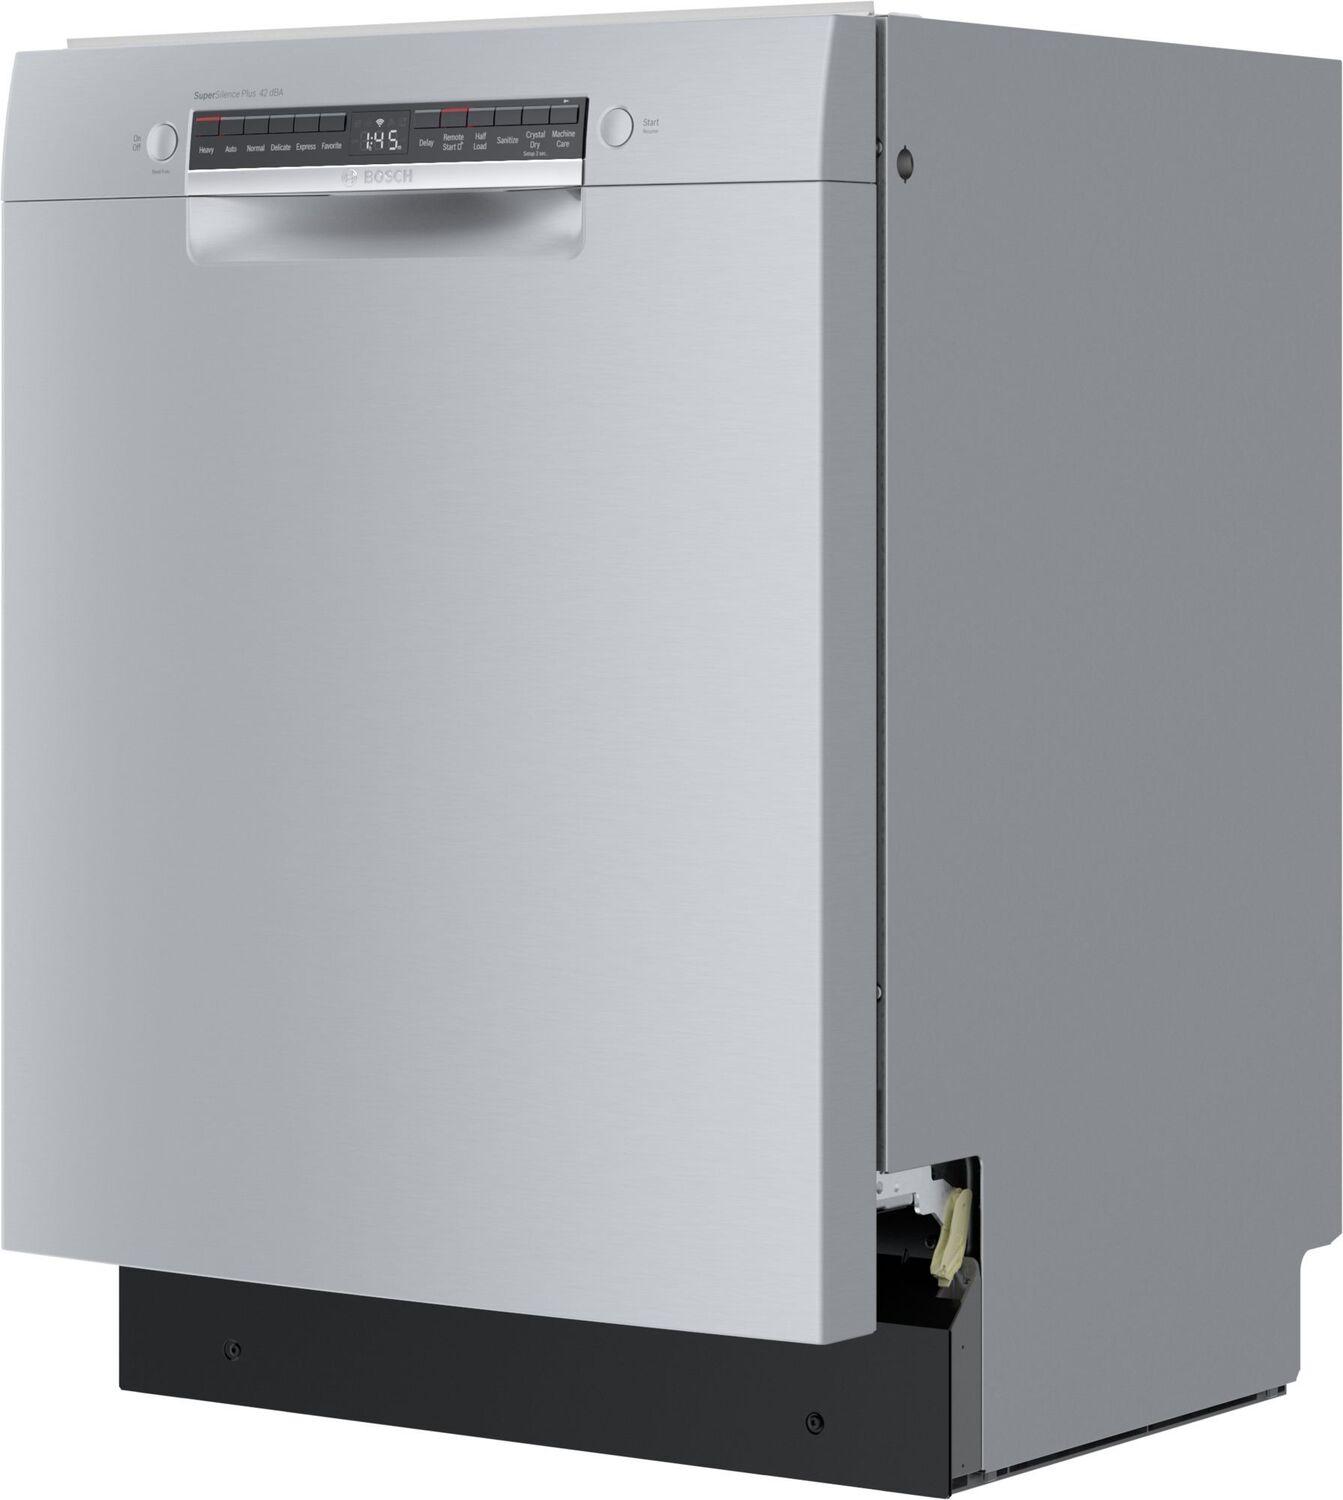 Bosch SGE78C55UC 800 Series Dishwasher 24" Stainless Steel Sge78C55Uc